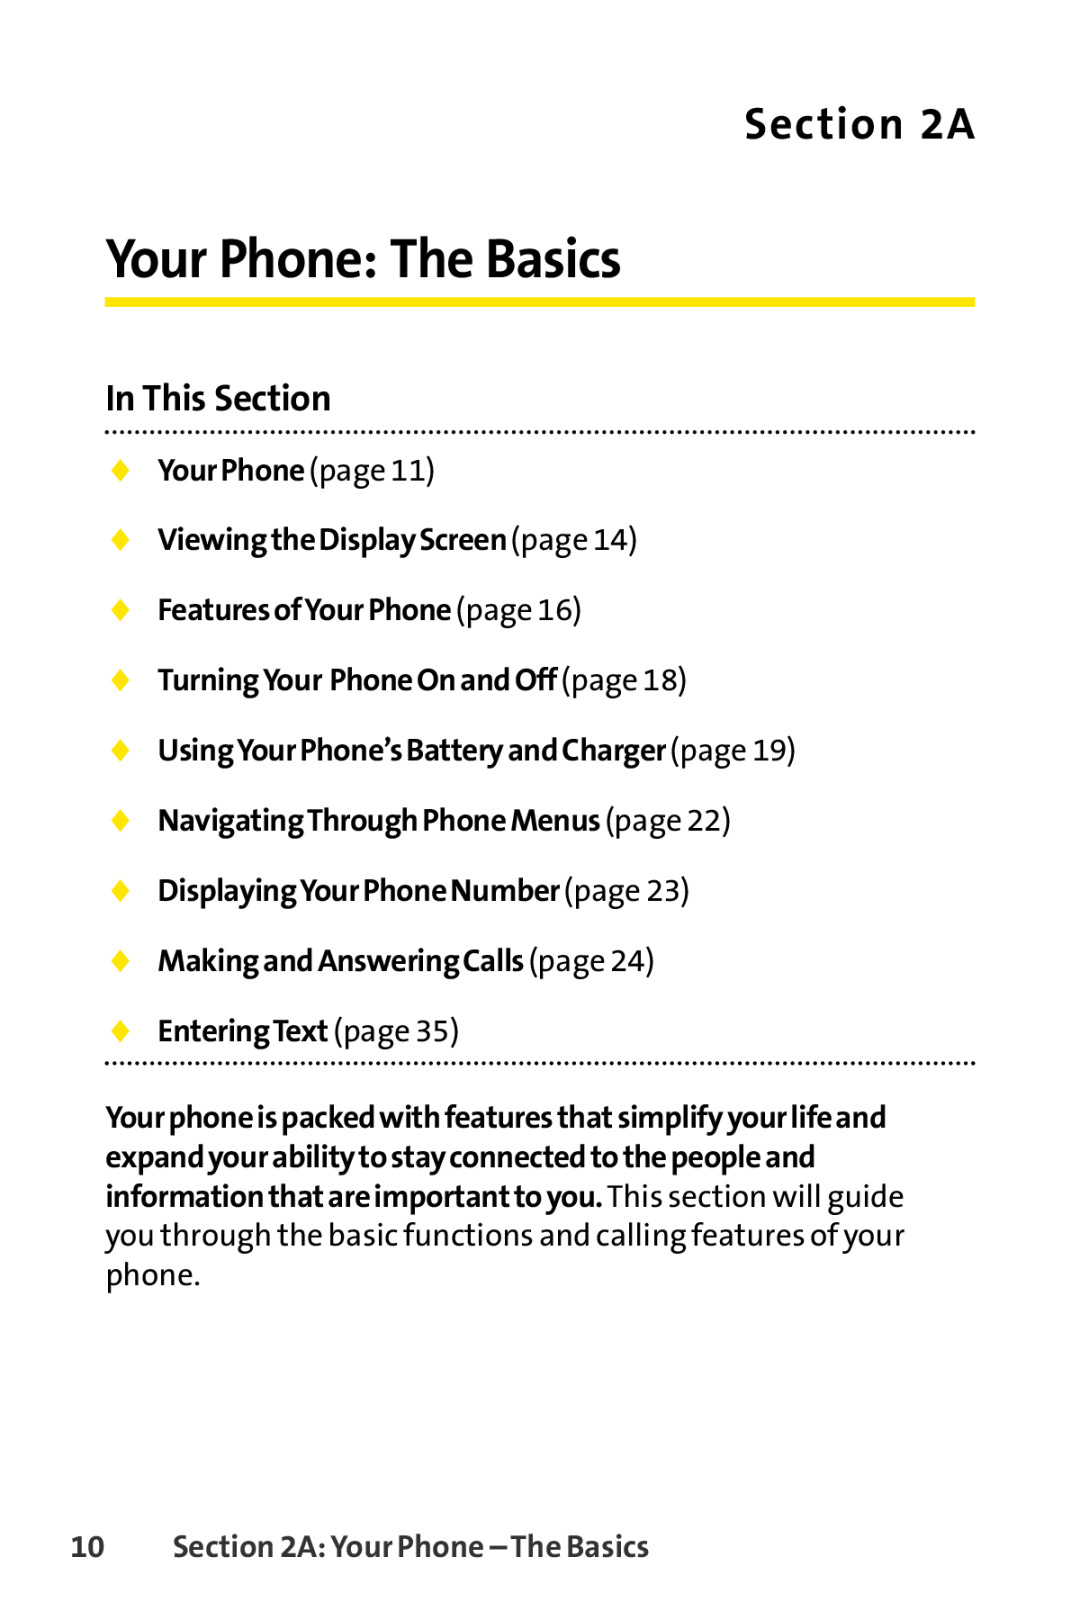 Sprint Nextel LX160 Your Phone The Basics,  YourPhonepage  ViewingtheDisplayScreenpage, A Your Phone - The Basics 